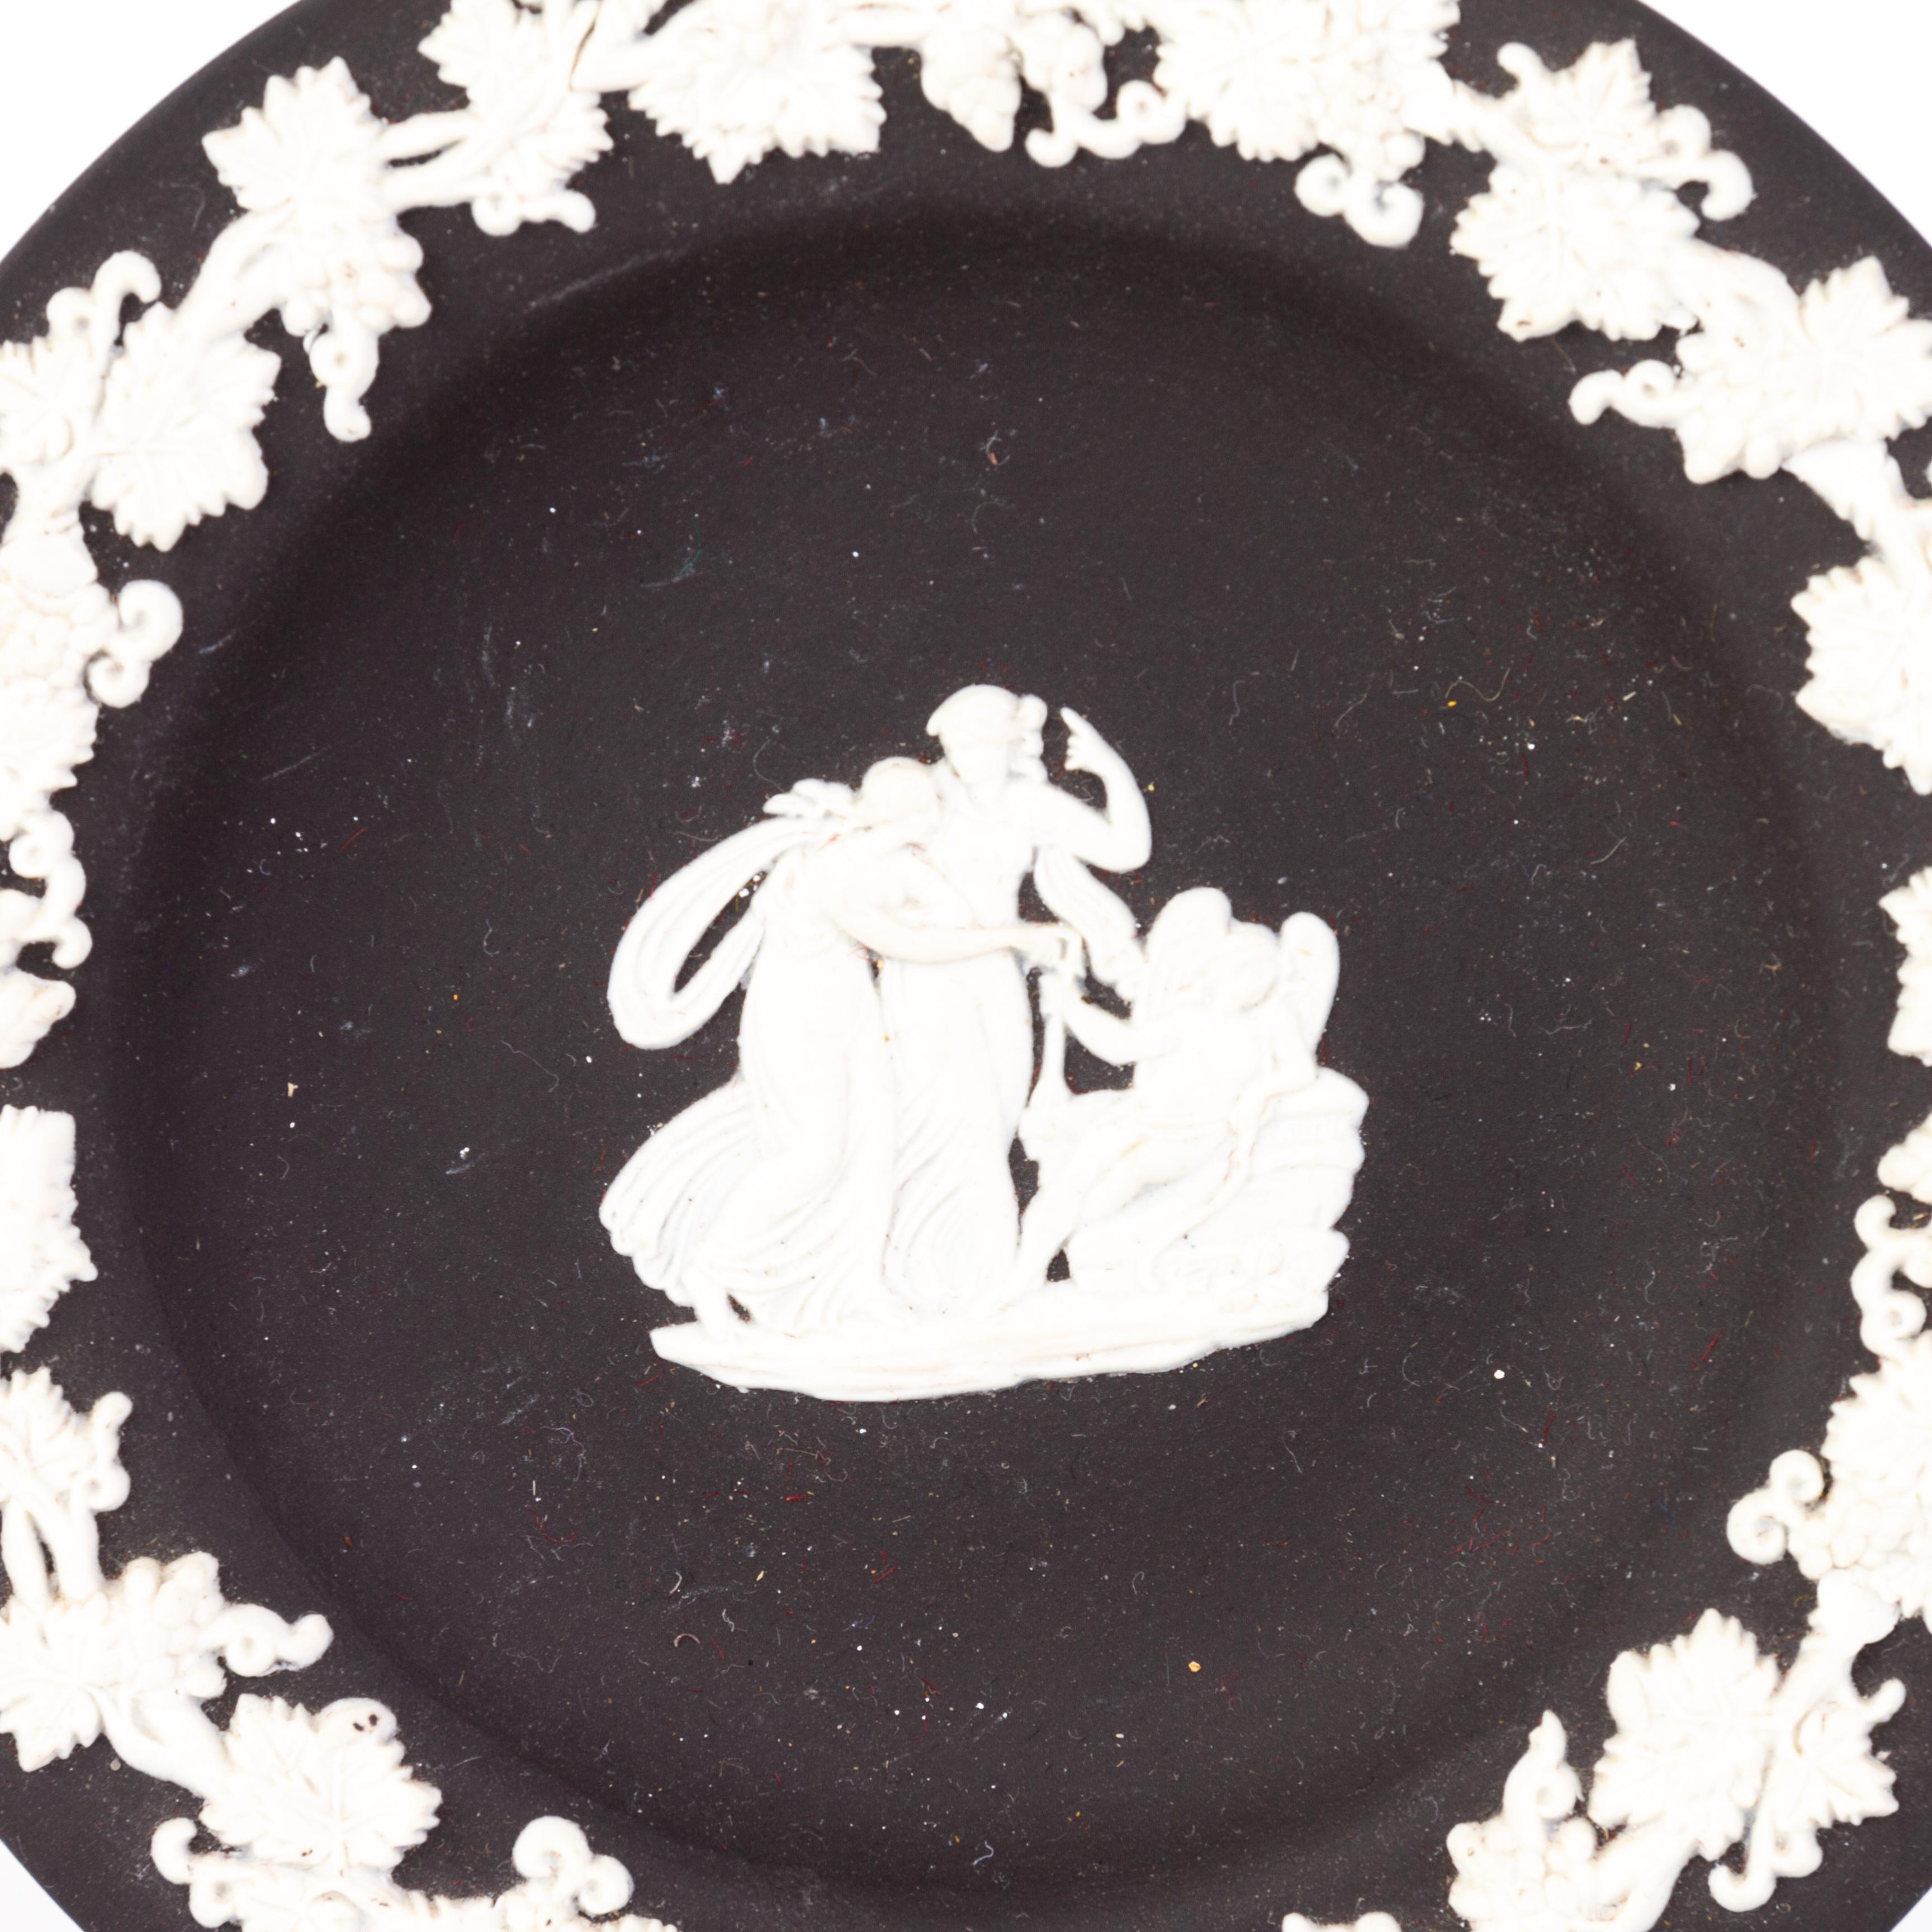 Wedgwood Black Basalt Jasperware Neoclassical Cameo Dish 
Good condition overall
From a private collection.
Free international shipping.